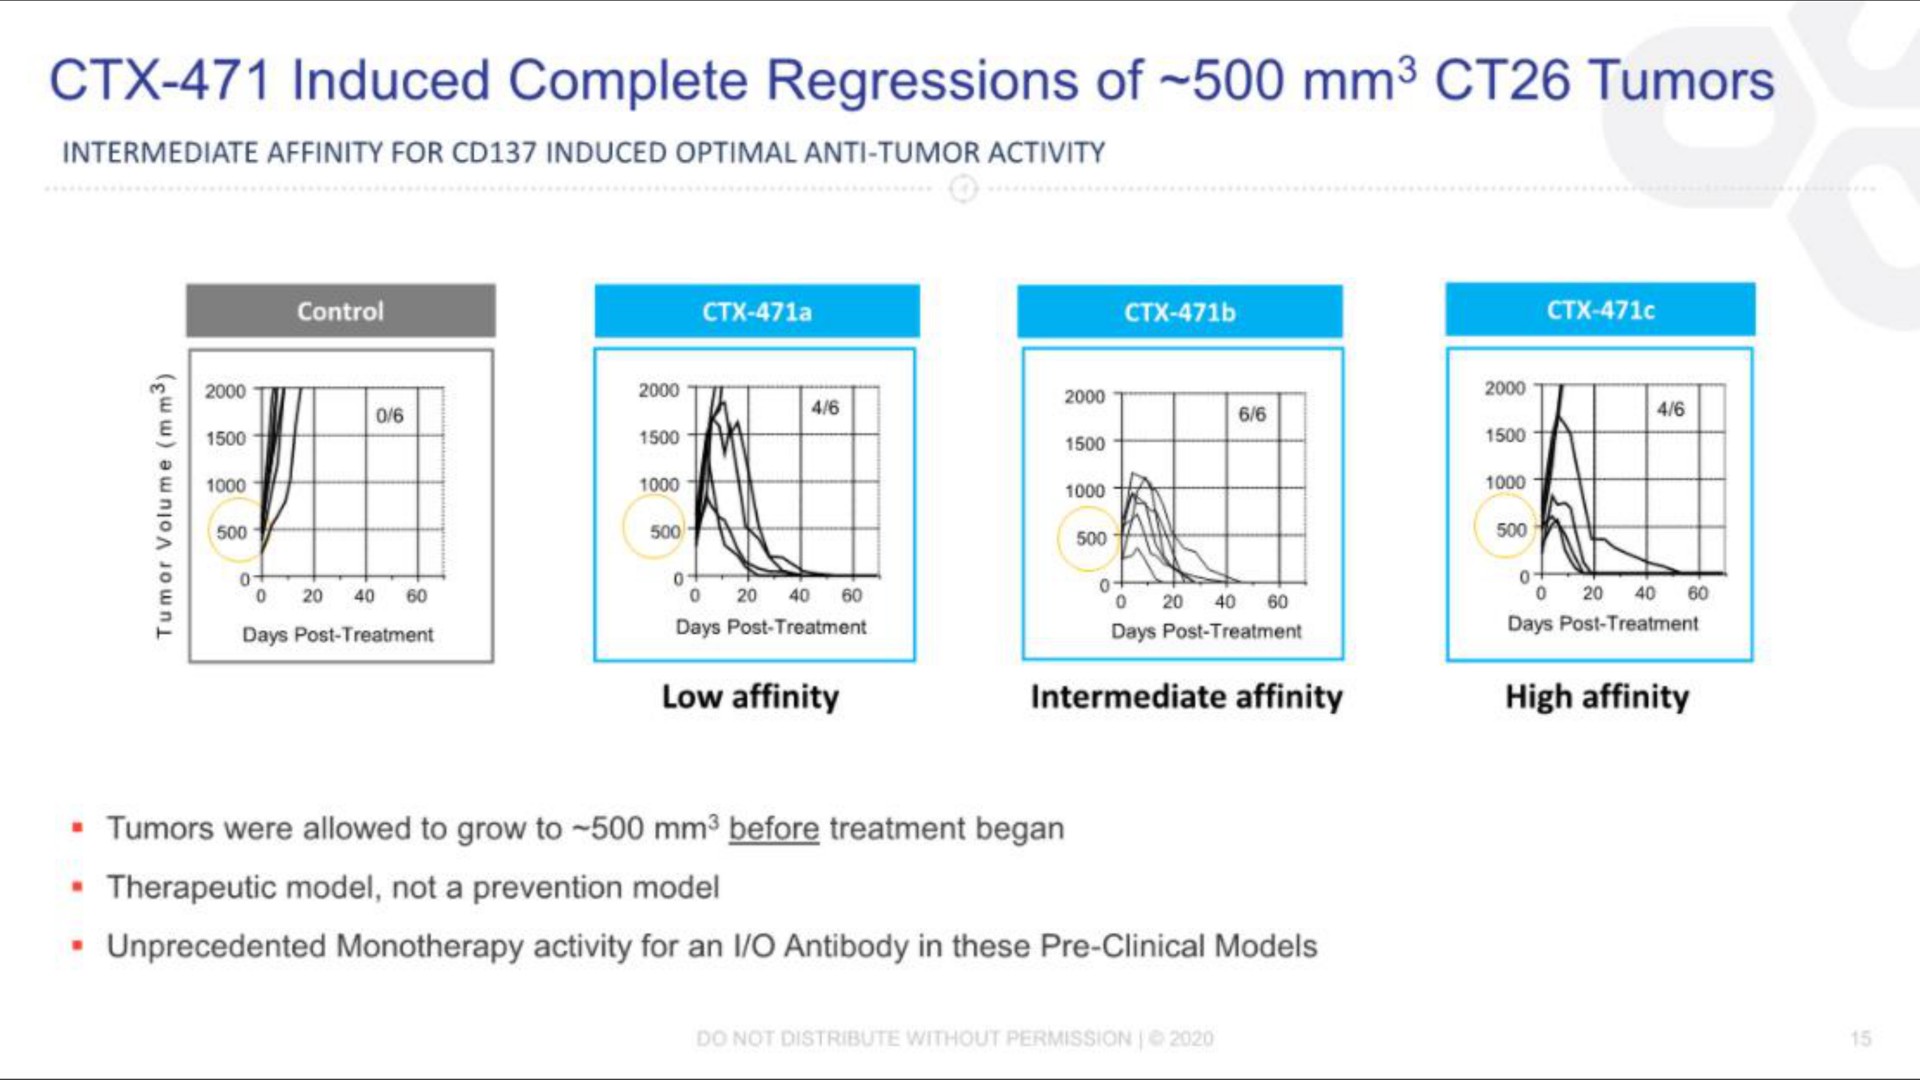 induced complete regressions of tumors | Compass Therapeutics